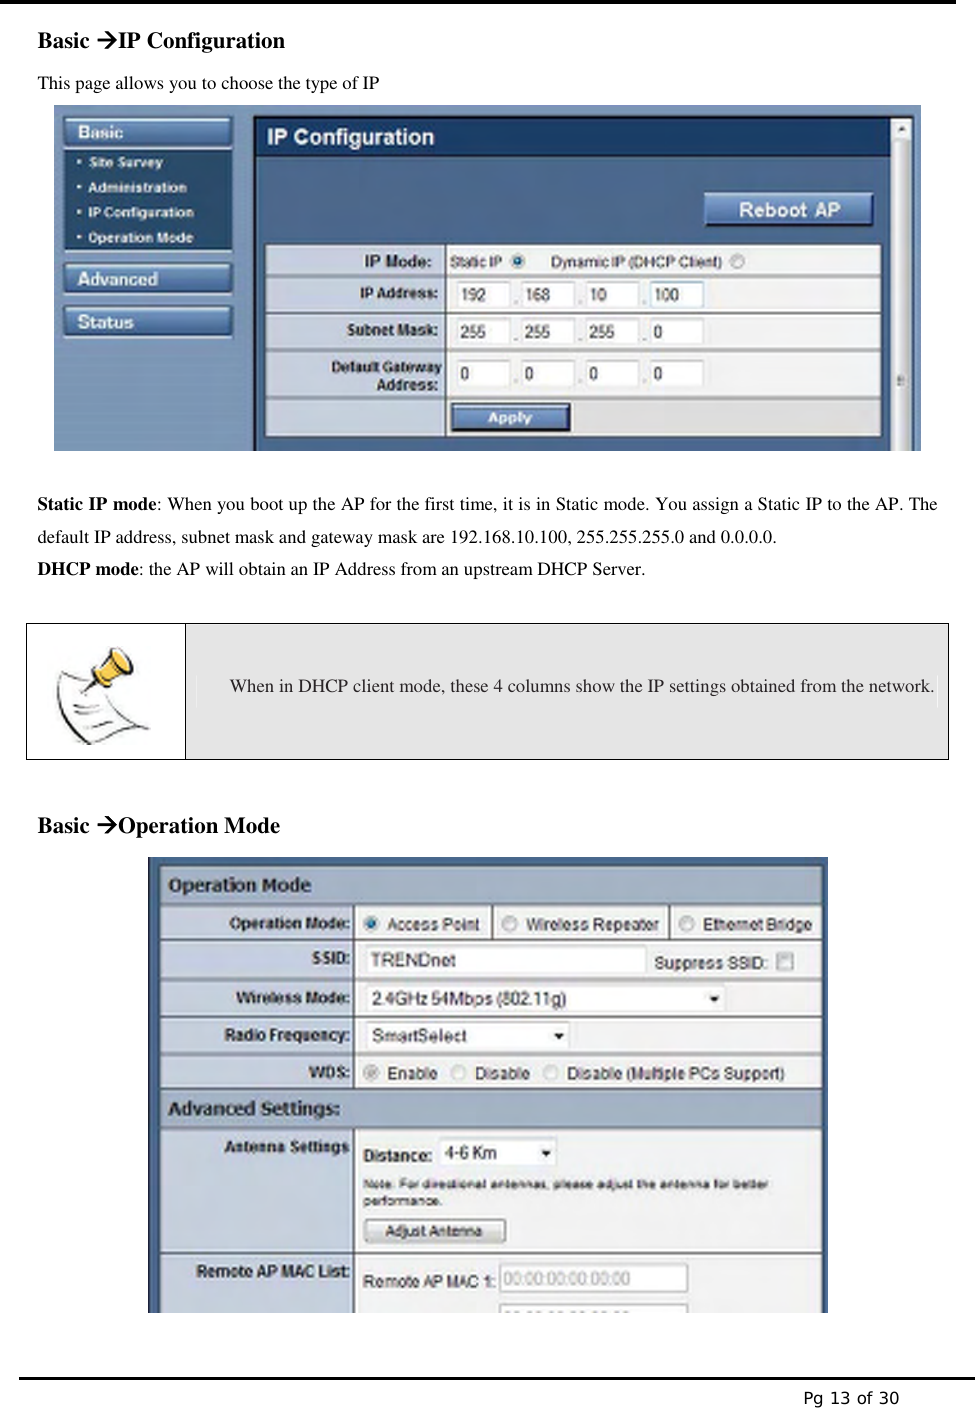 Pg 13 of 30Basic IP ConfigurationThis page allows you to choose the type of IPStatic IP mode: When you boot up the AP for the first time, it is in Static mode. You assign a Static IP to the AP. Thedefault IP address, subnet mask and gateway mask are 192.168.10.100, 255.255.255.0 and 0.0.0.0.DHCP mode: the AP will obtain an IP Address from an upstream DHCP Server.When in DHCP client mode, these 4 columns show the IP settings obtained from the network.Basic Operation Mode